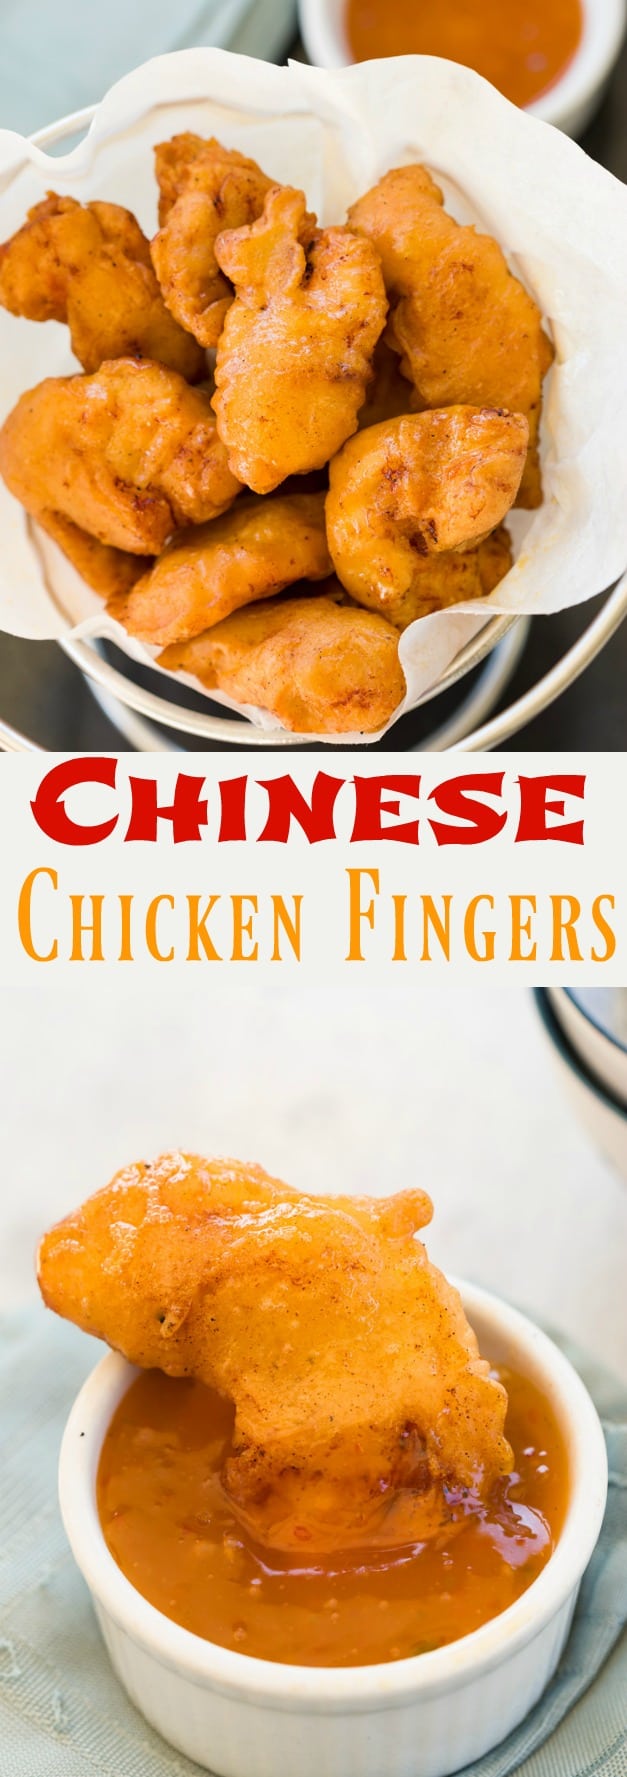 These homemade Chinese chicken fingers are JUST like from a restaurant. Crispy and golden on the outside and filled with juicy chicken on the inside. Perfect with sweet and sour sauce! #chicken #chinesechicken #chickenfingers #appetizers #NYE #ChineseFood #AsianCuisine #Fried #Snacks